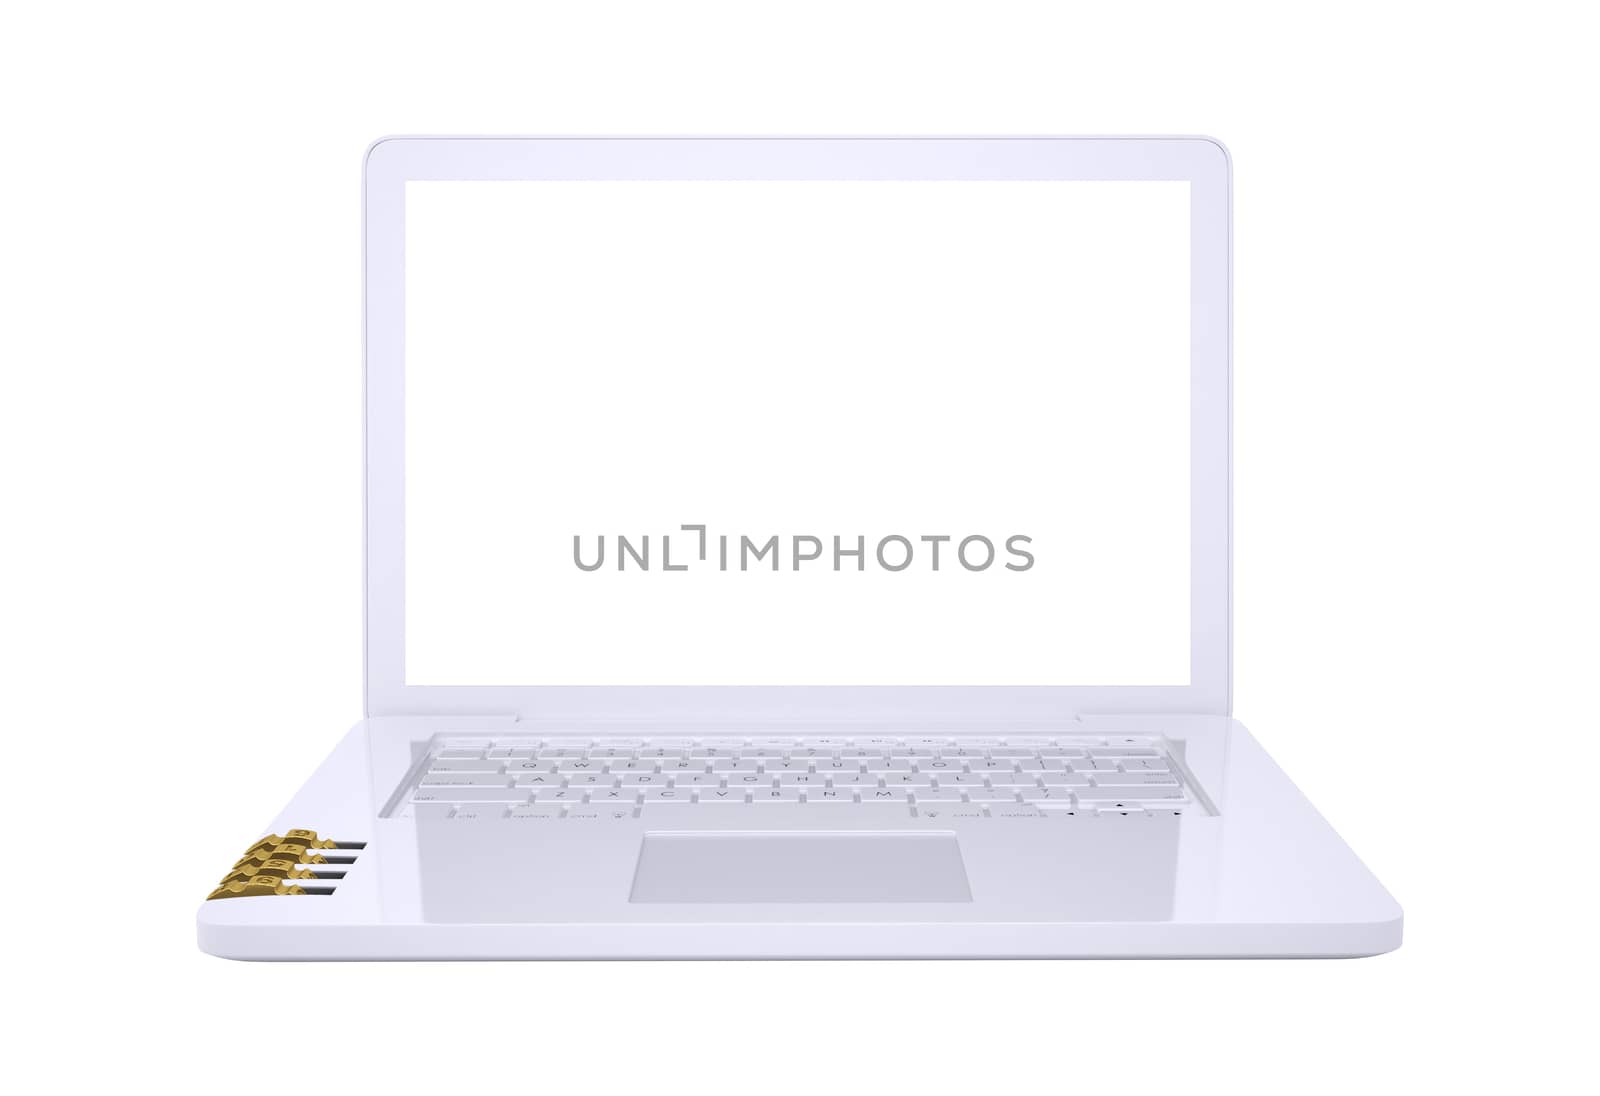 Laptop with wheels combination code. Isolated on white background